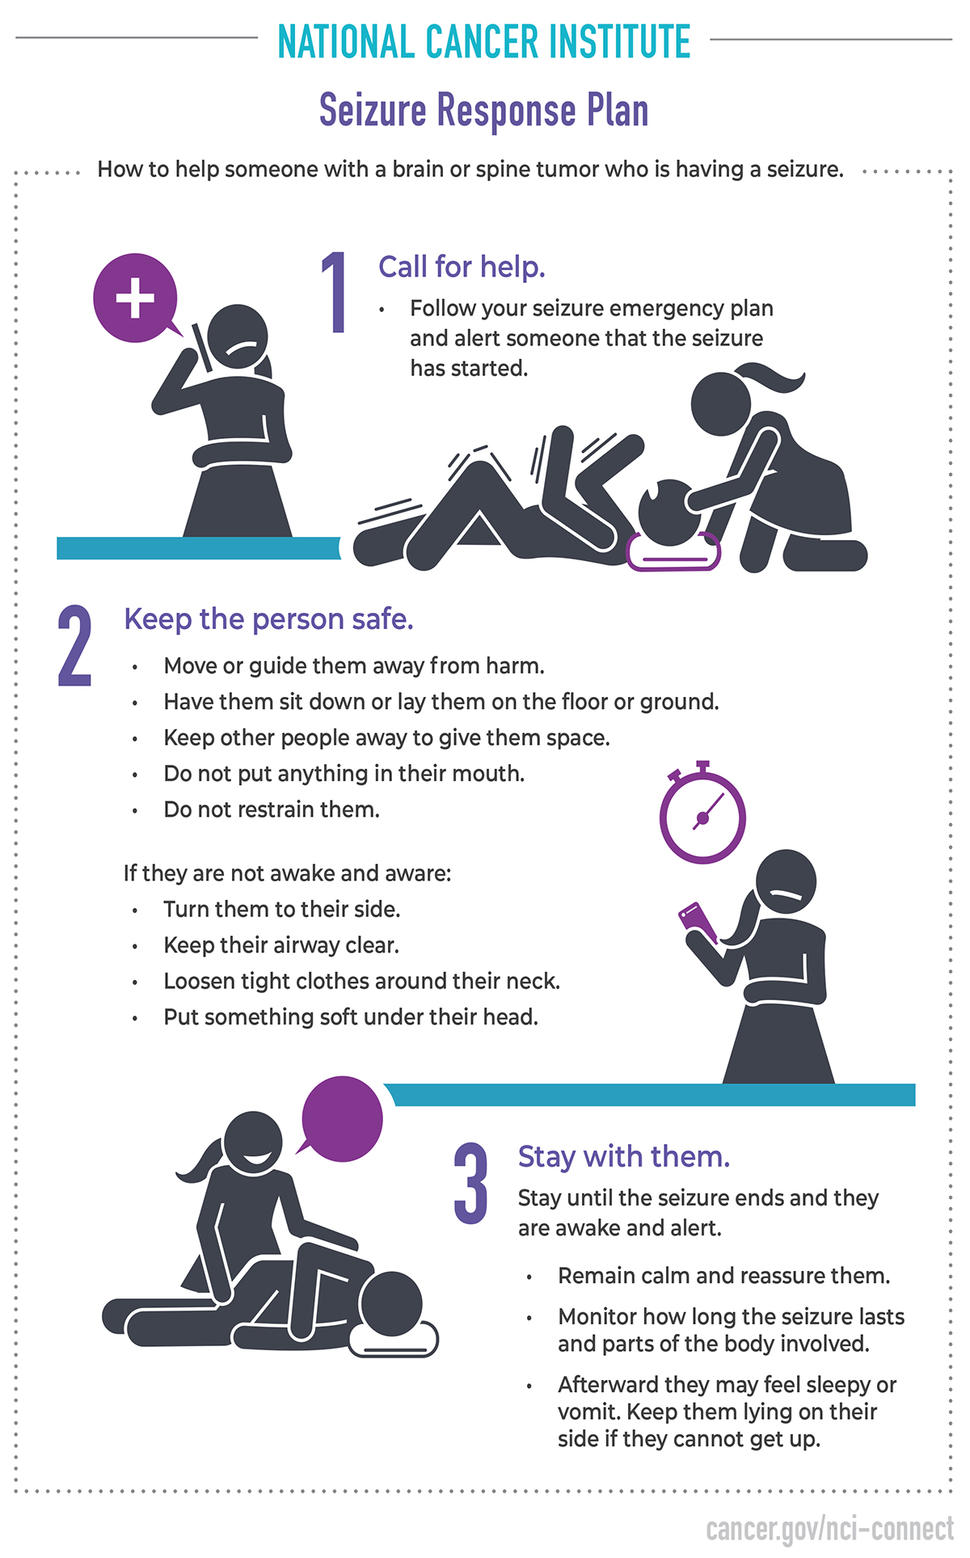 Infographic titled: “Seizure Response Plan.” Three steps: 1. Call for help. 2. Keep the person safe. 3. Stay with them.